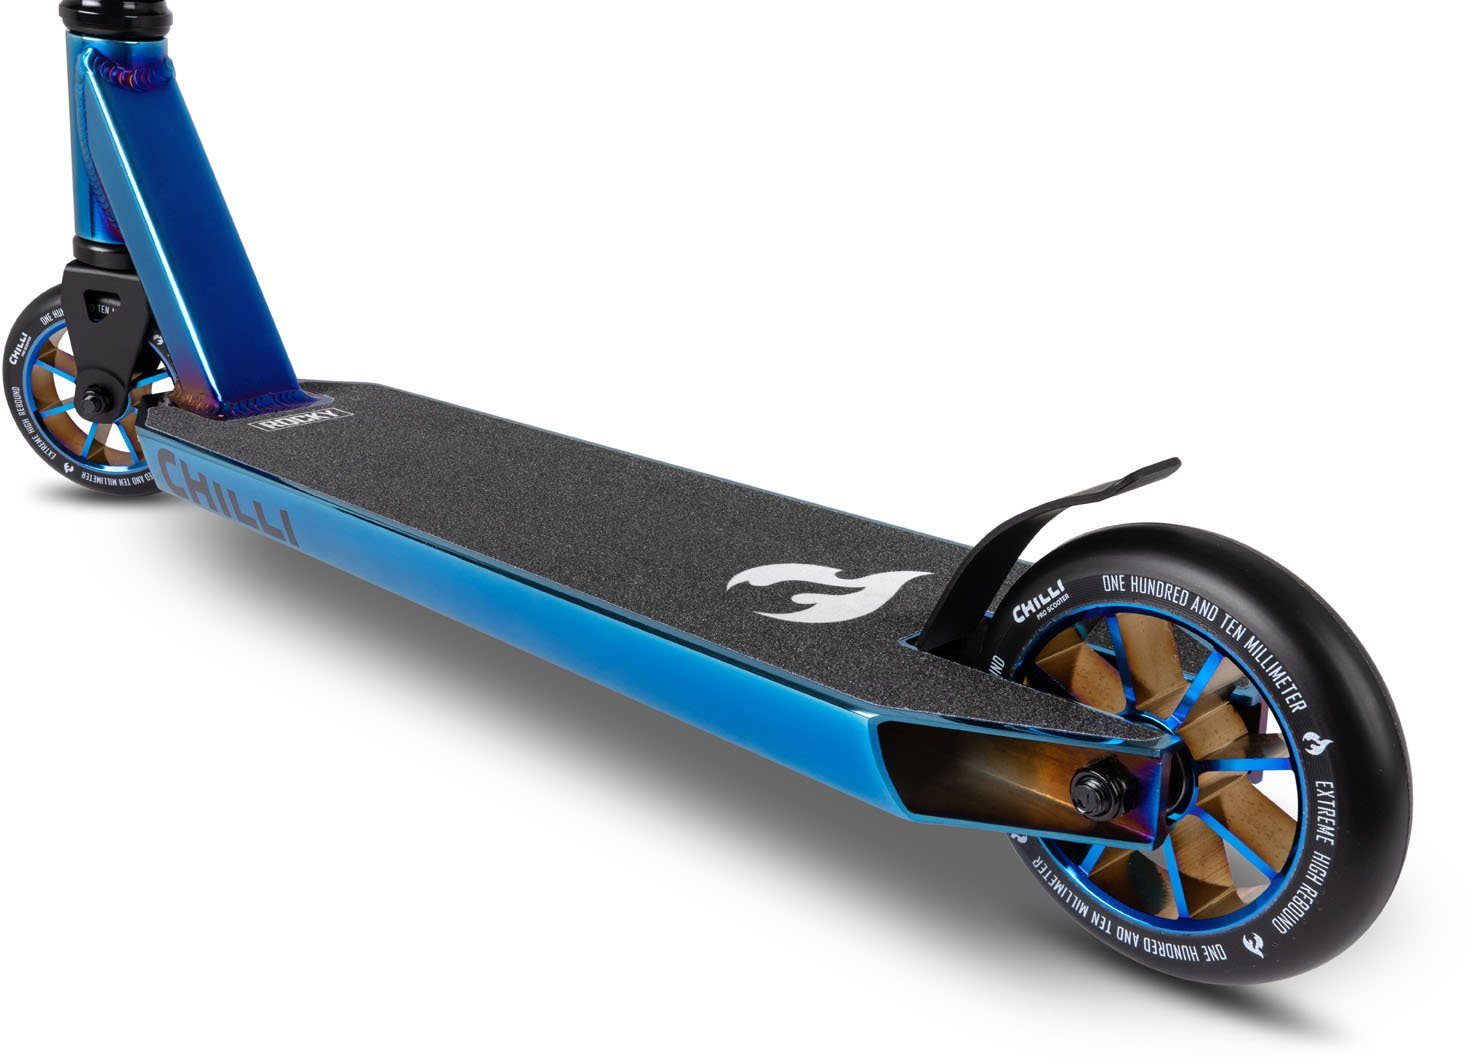 Chilli Pro Stunt Stuntscooter 2100003541307 Edition Scooter Scooter neochrome Grind blue Limited